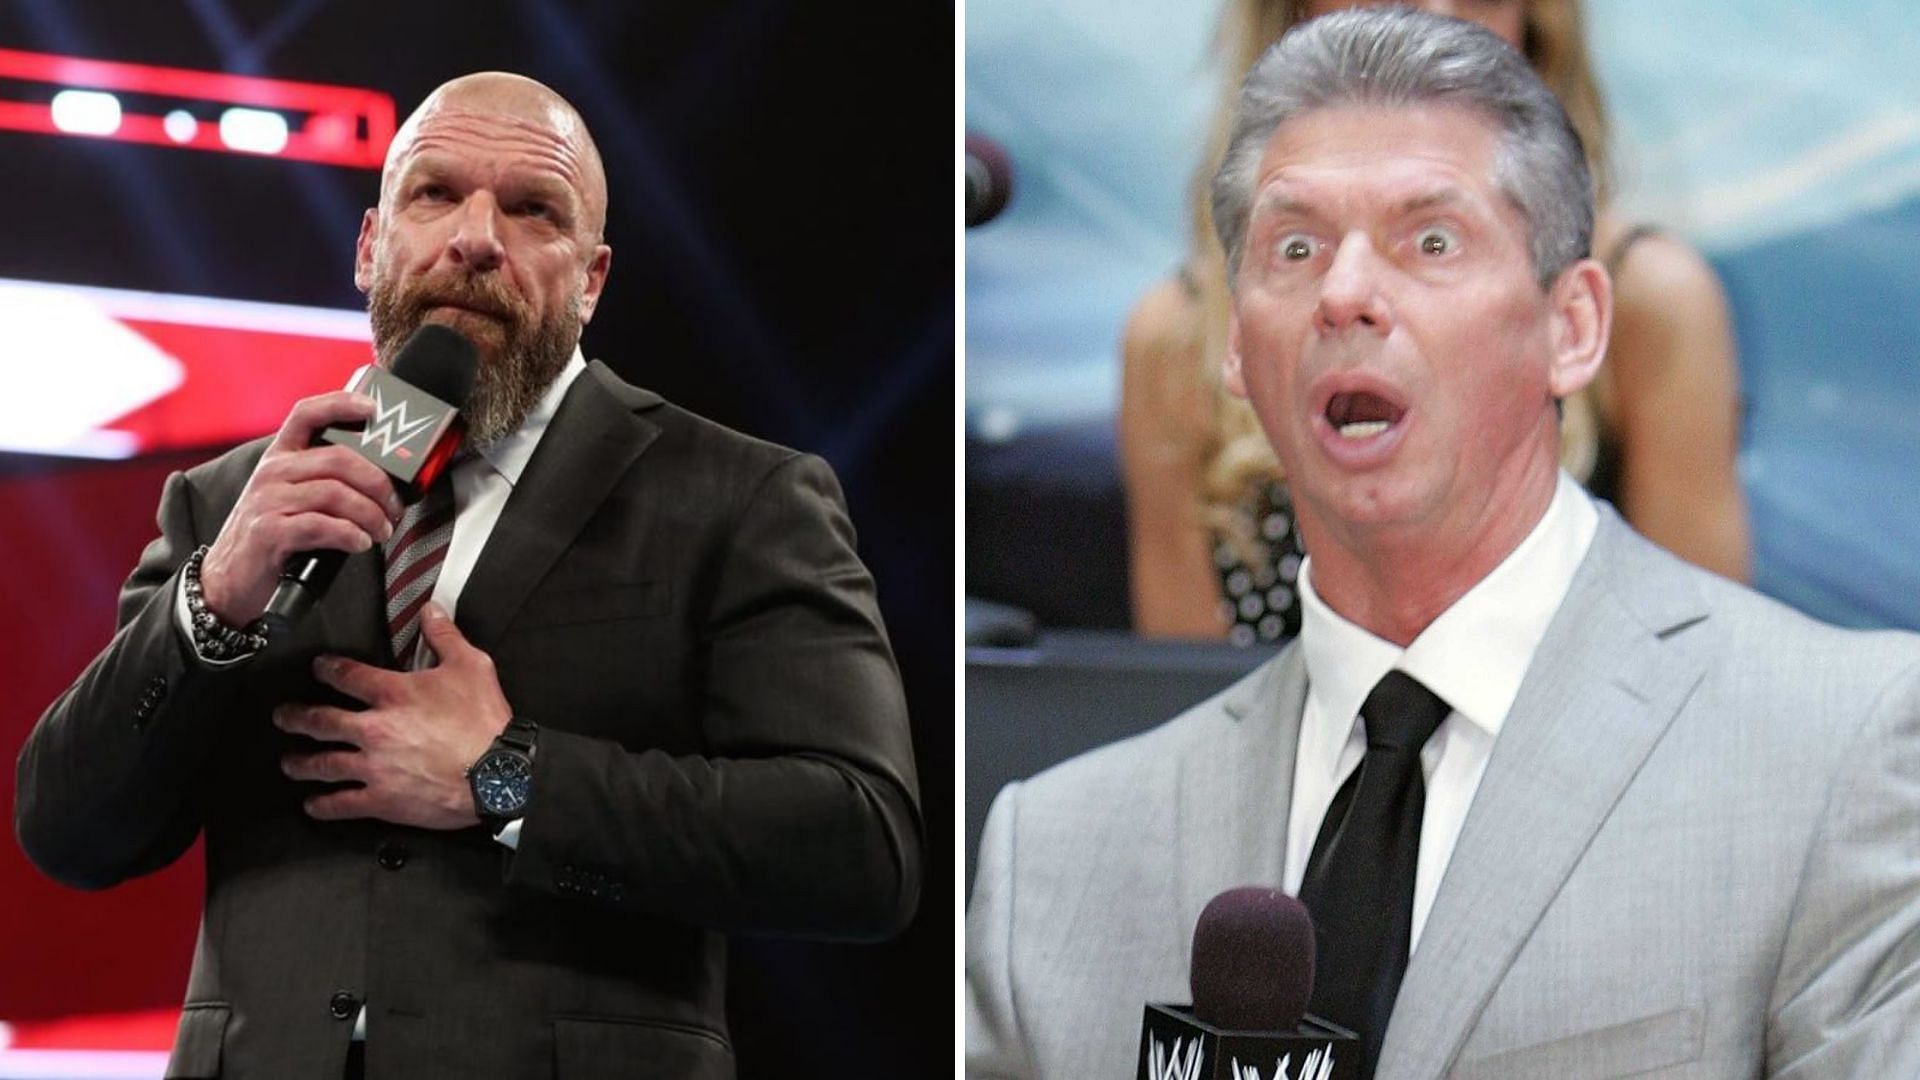 Triple H replaced Vince McMahon as WWE Head of Creative in July